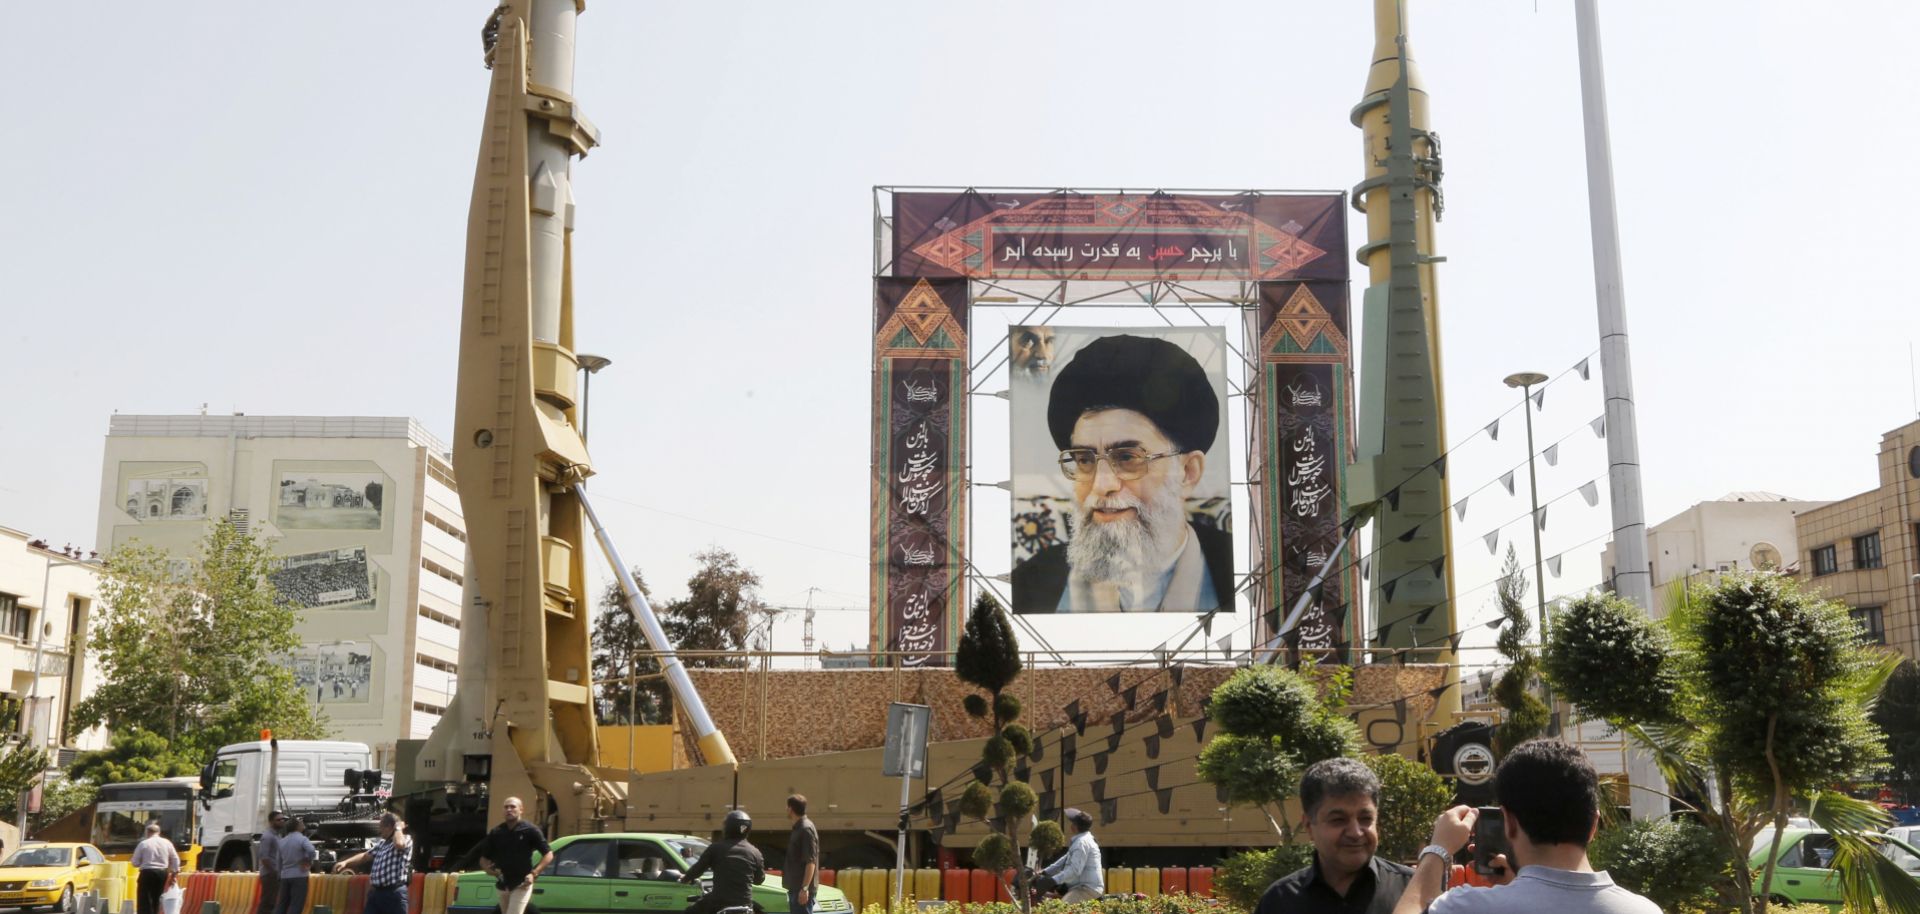 Iran has increased the budget for its ballistic missile program twice this year.